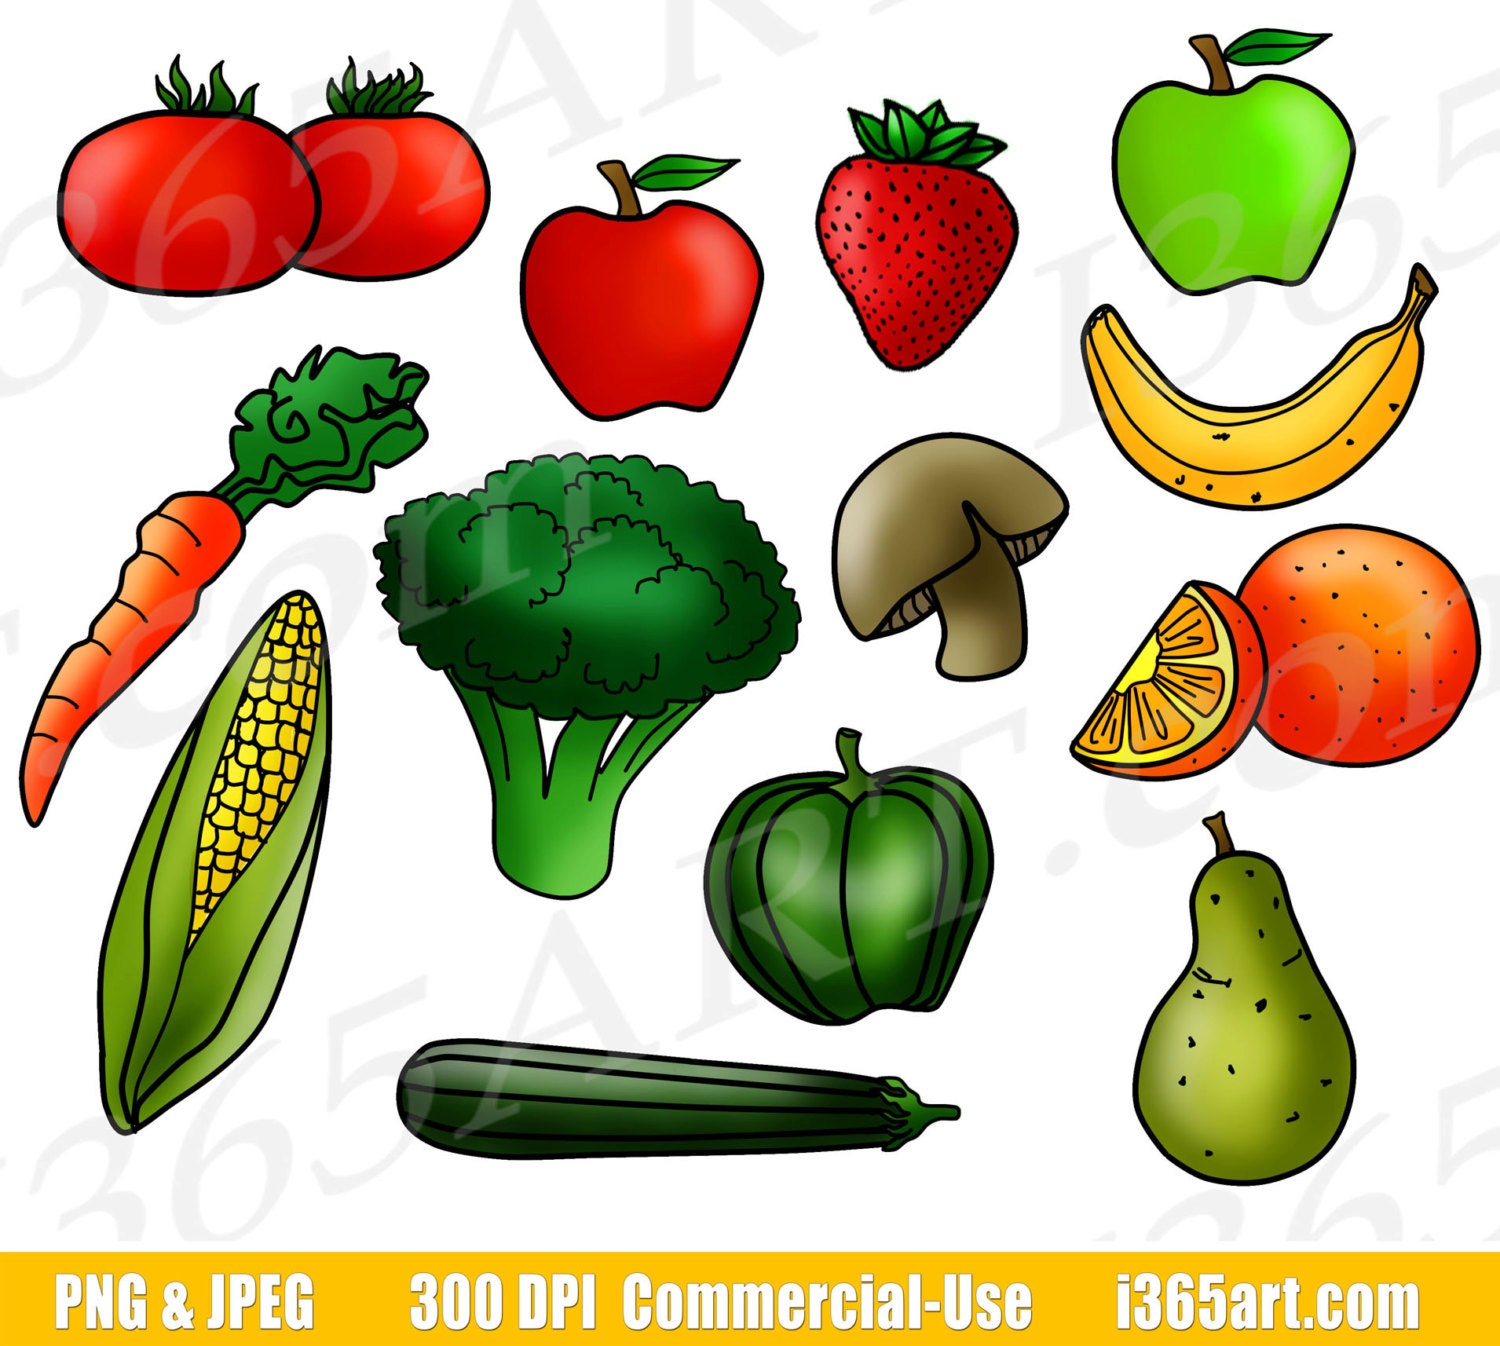 buy 1 get 1 free png clipart